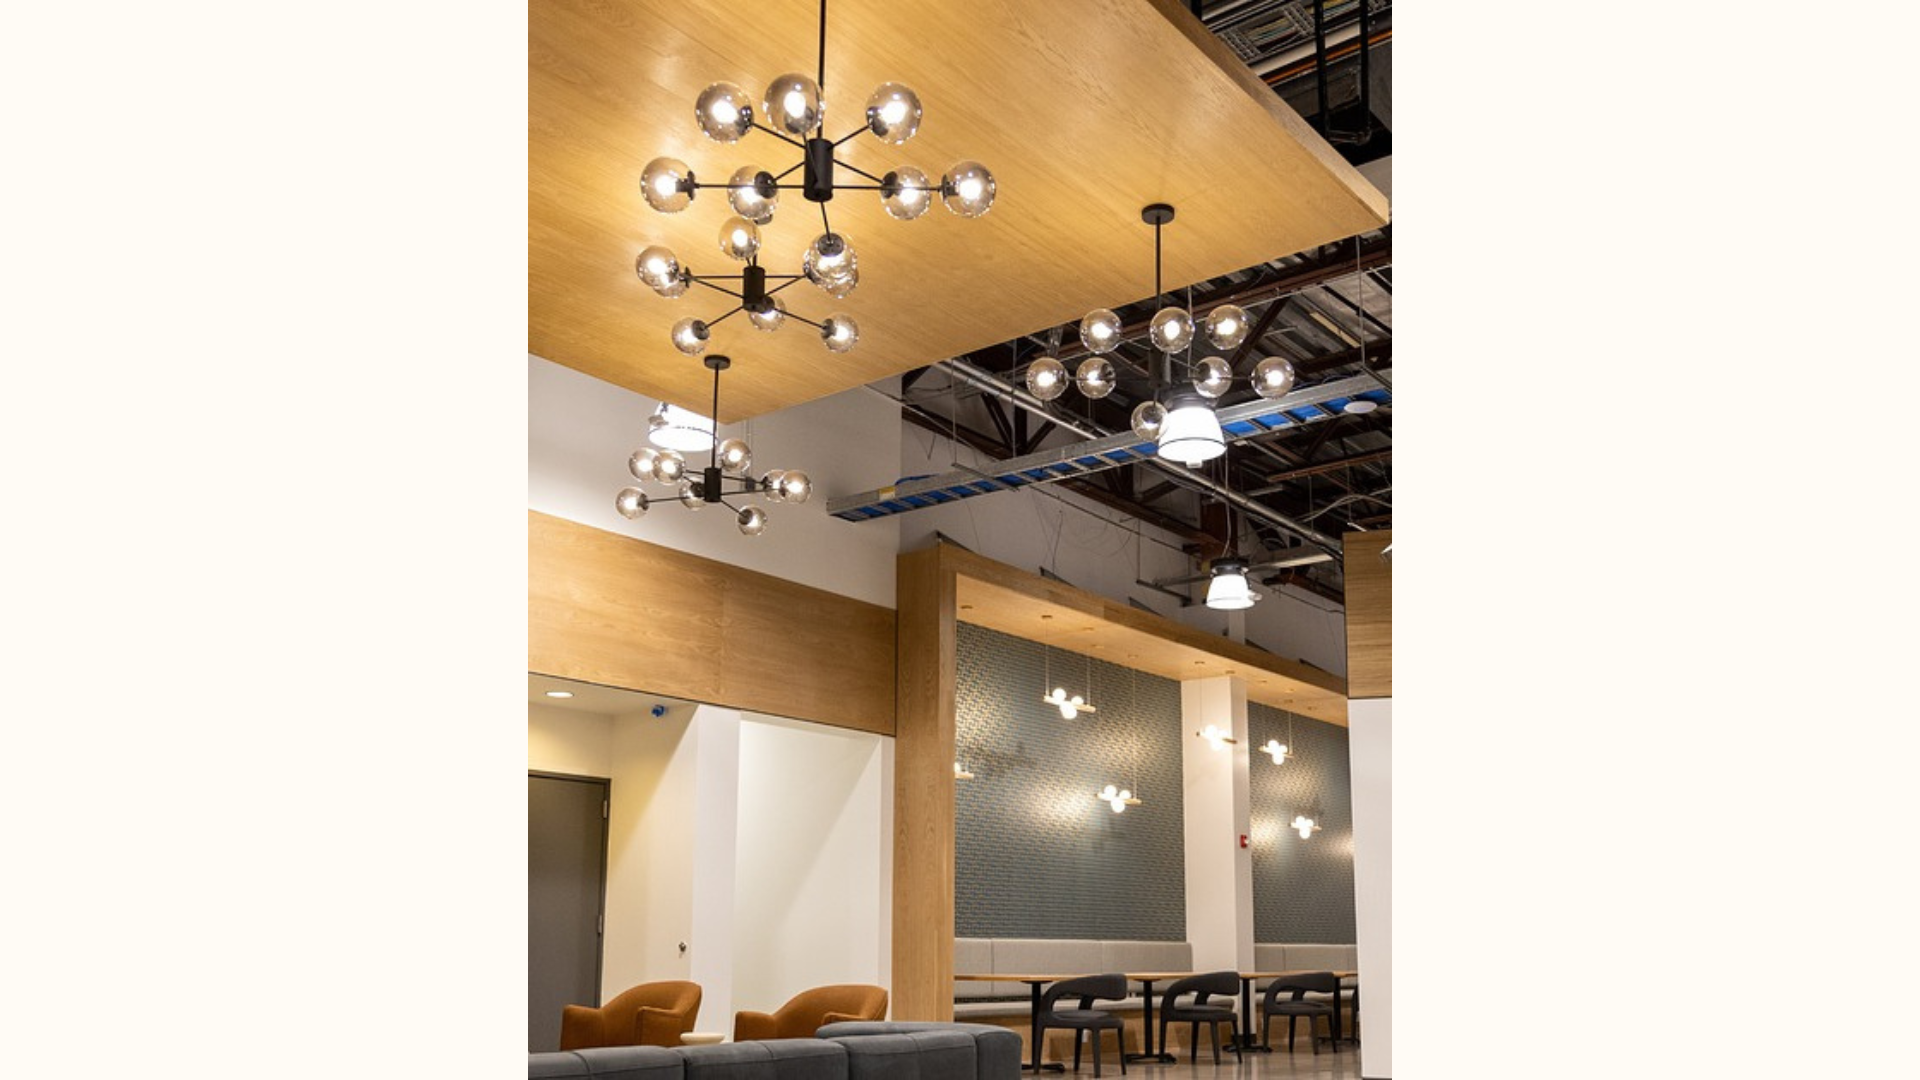 Stylish and modern interior of a coworking space illuminated by a cluster of spherical light bulbs hanging from a wooden ceiling, providing a warm glow.